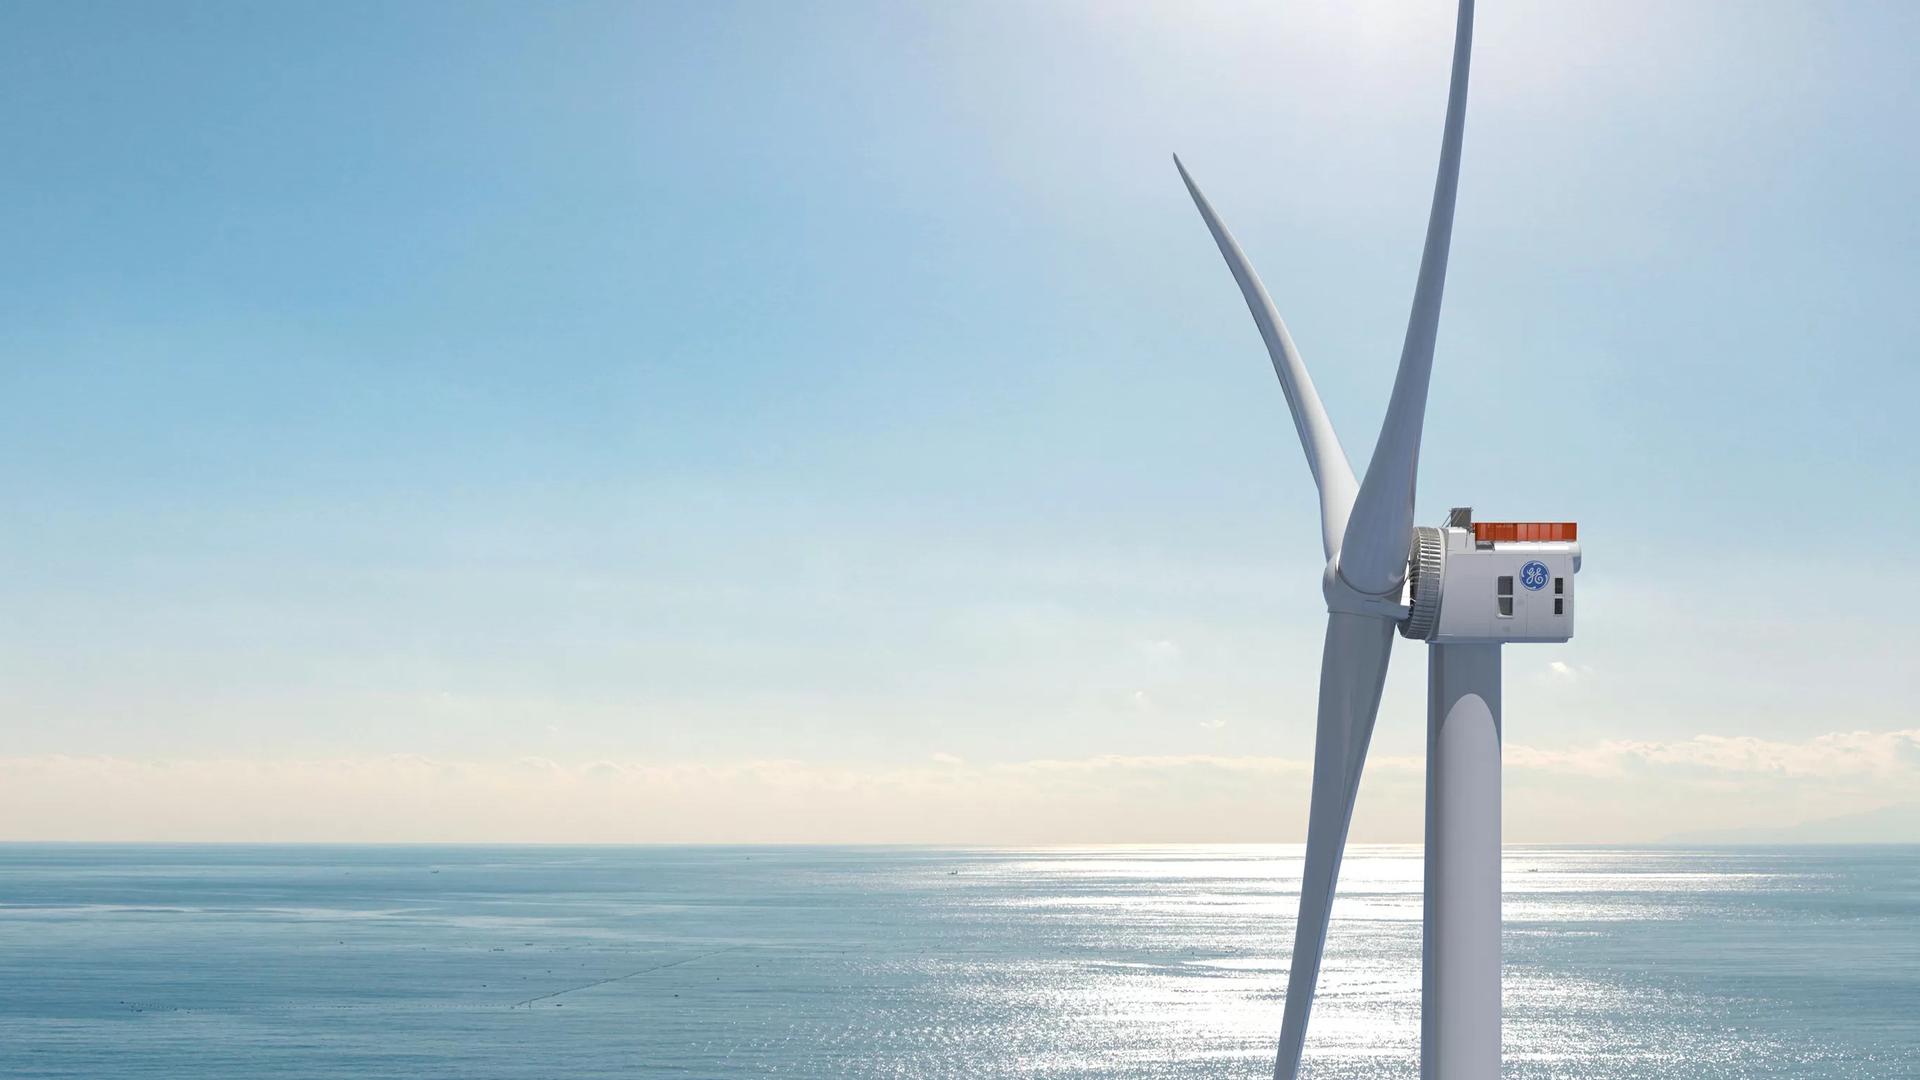 Haliade-X wind turbines — nearly the size of the Eiffel Tower — are a game changer for the global offshore wind industry. A single turbine can power over 10,000 homes at competitive rates. 